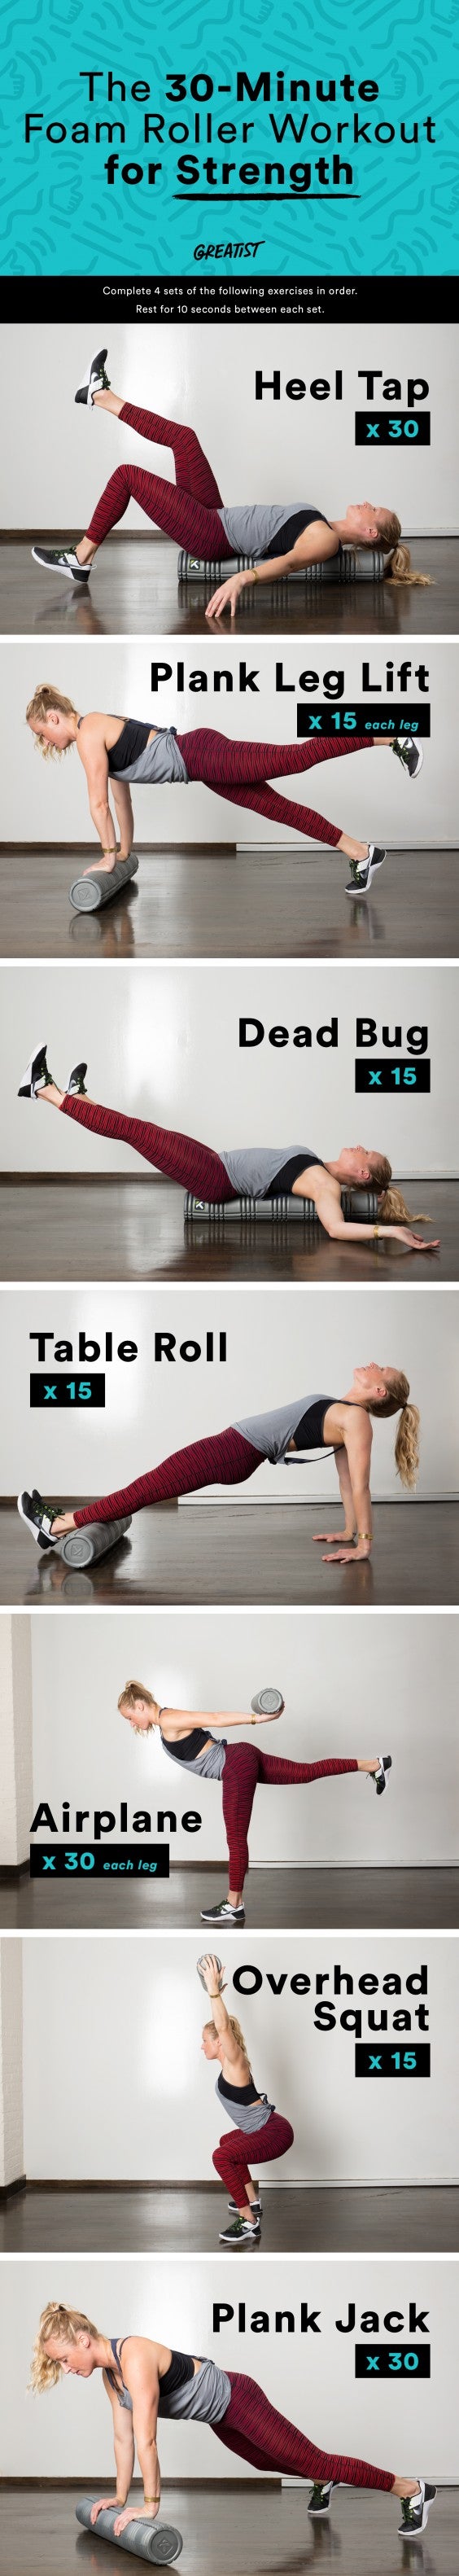 Ab Roller Workout Chart